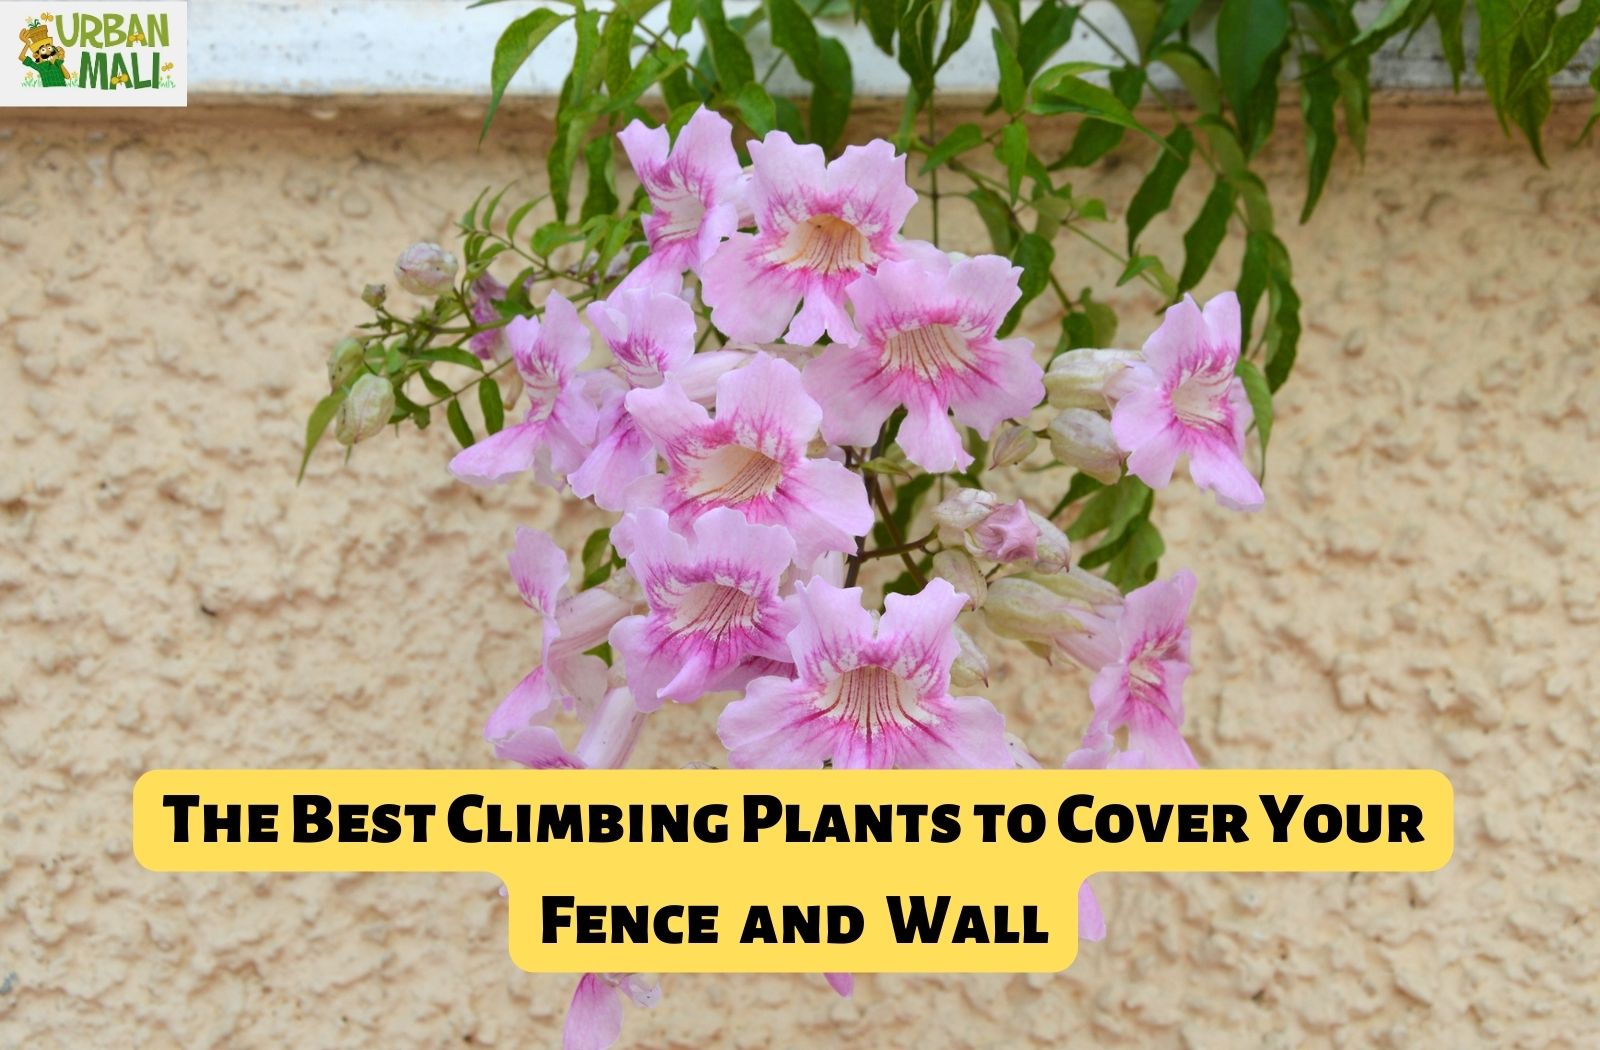 Curtain Creeper: An Easy-To-Grow Climbing Plant That Makes Your Home Garden  Vibrant